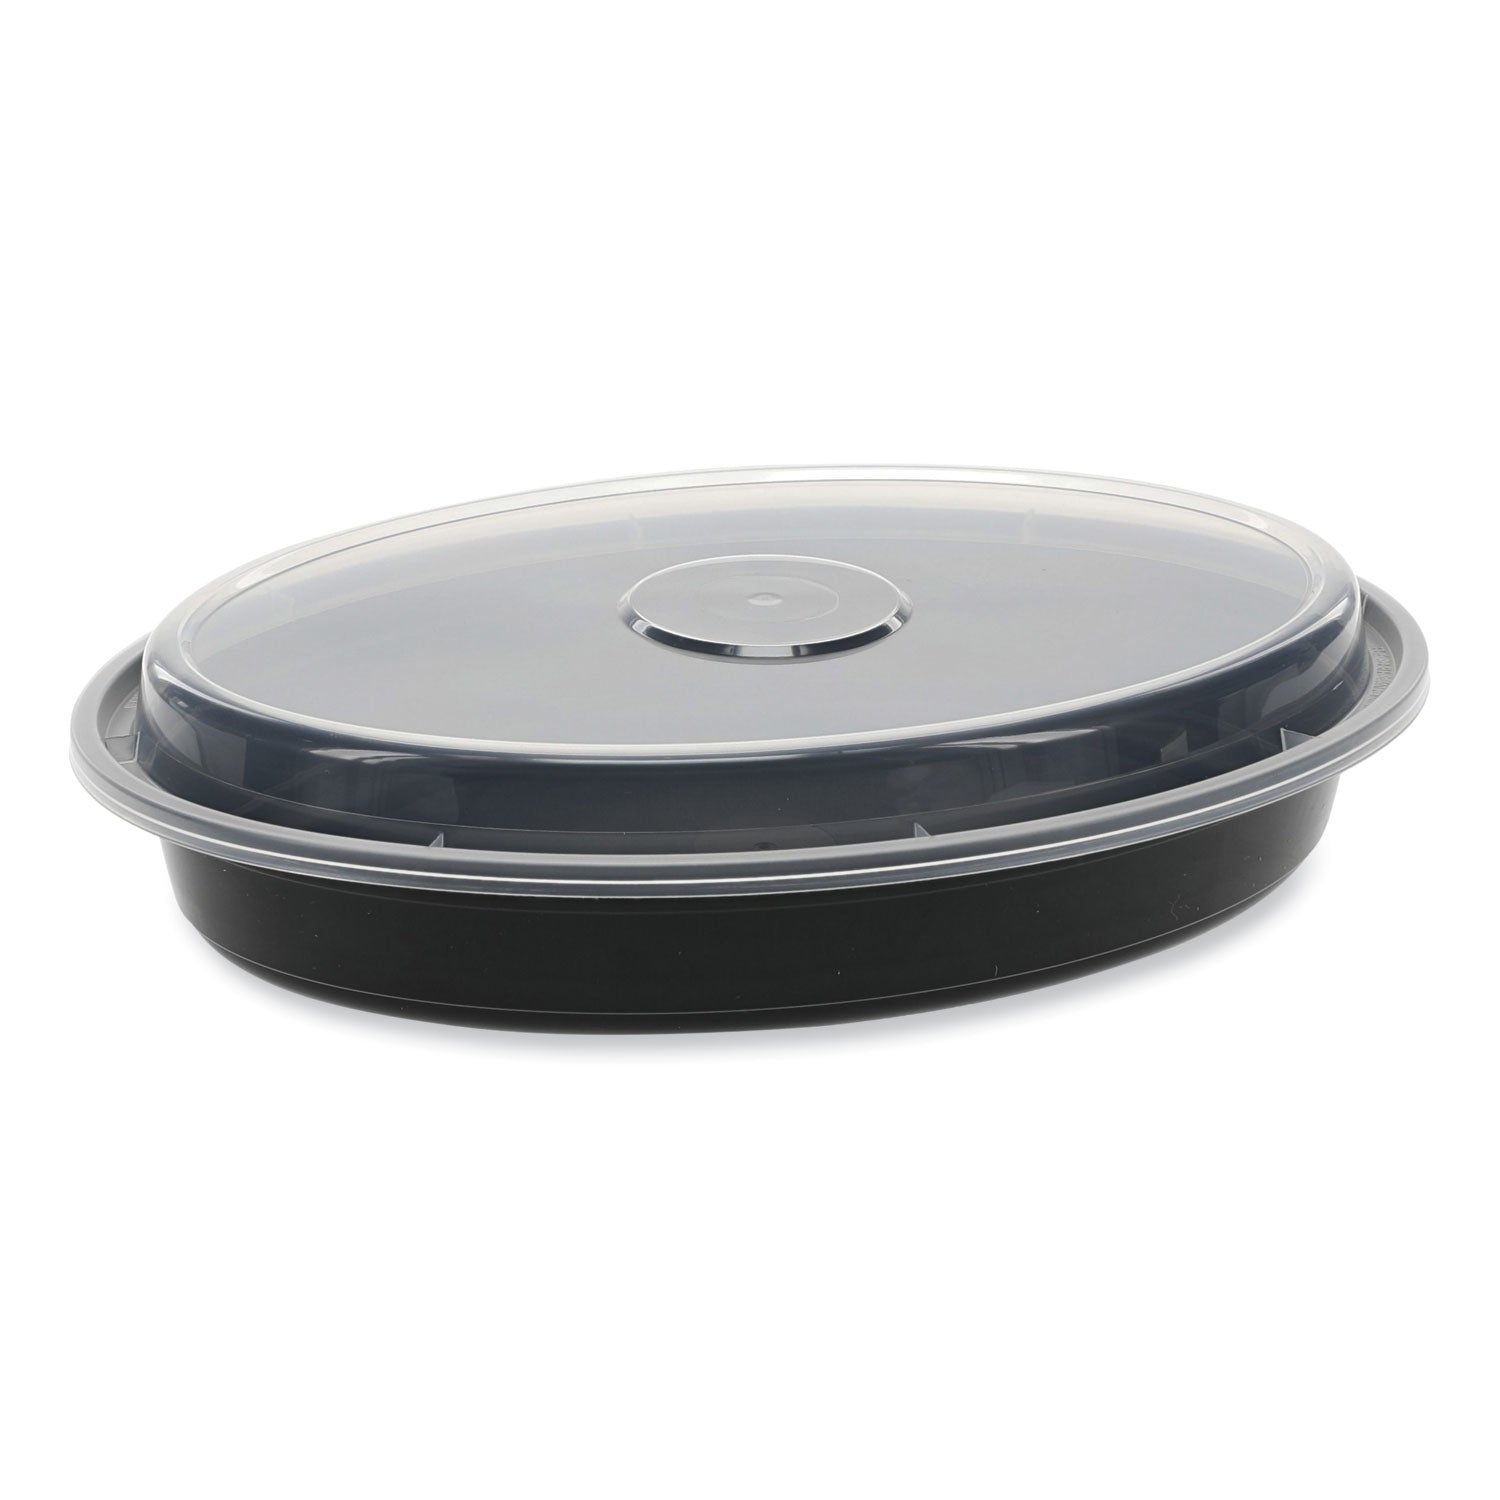 newspring-versatainer-microwavable-containers-oval-24-oz-91-x-67-x-145-black-clear-plastic-150-carton_pctoc24b - 1